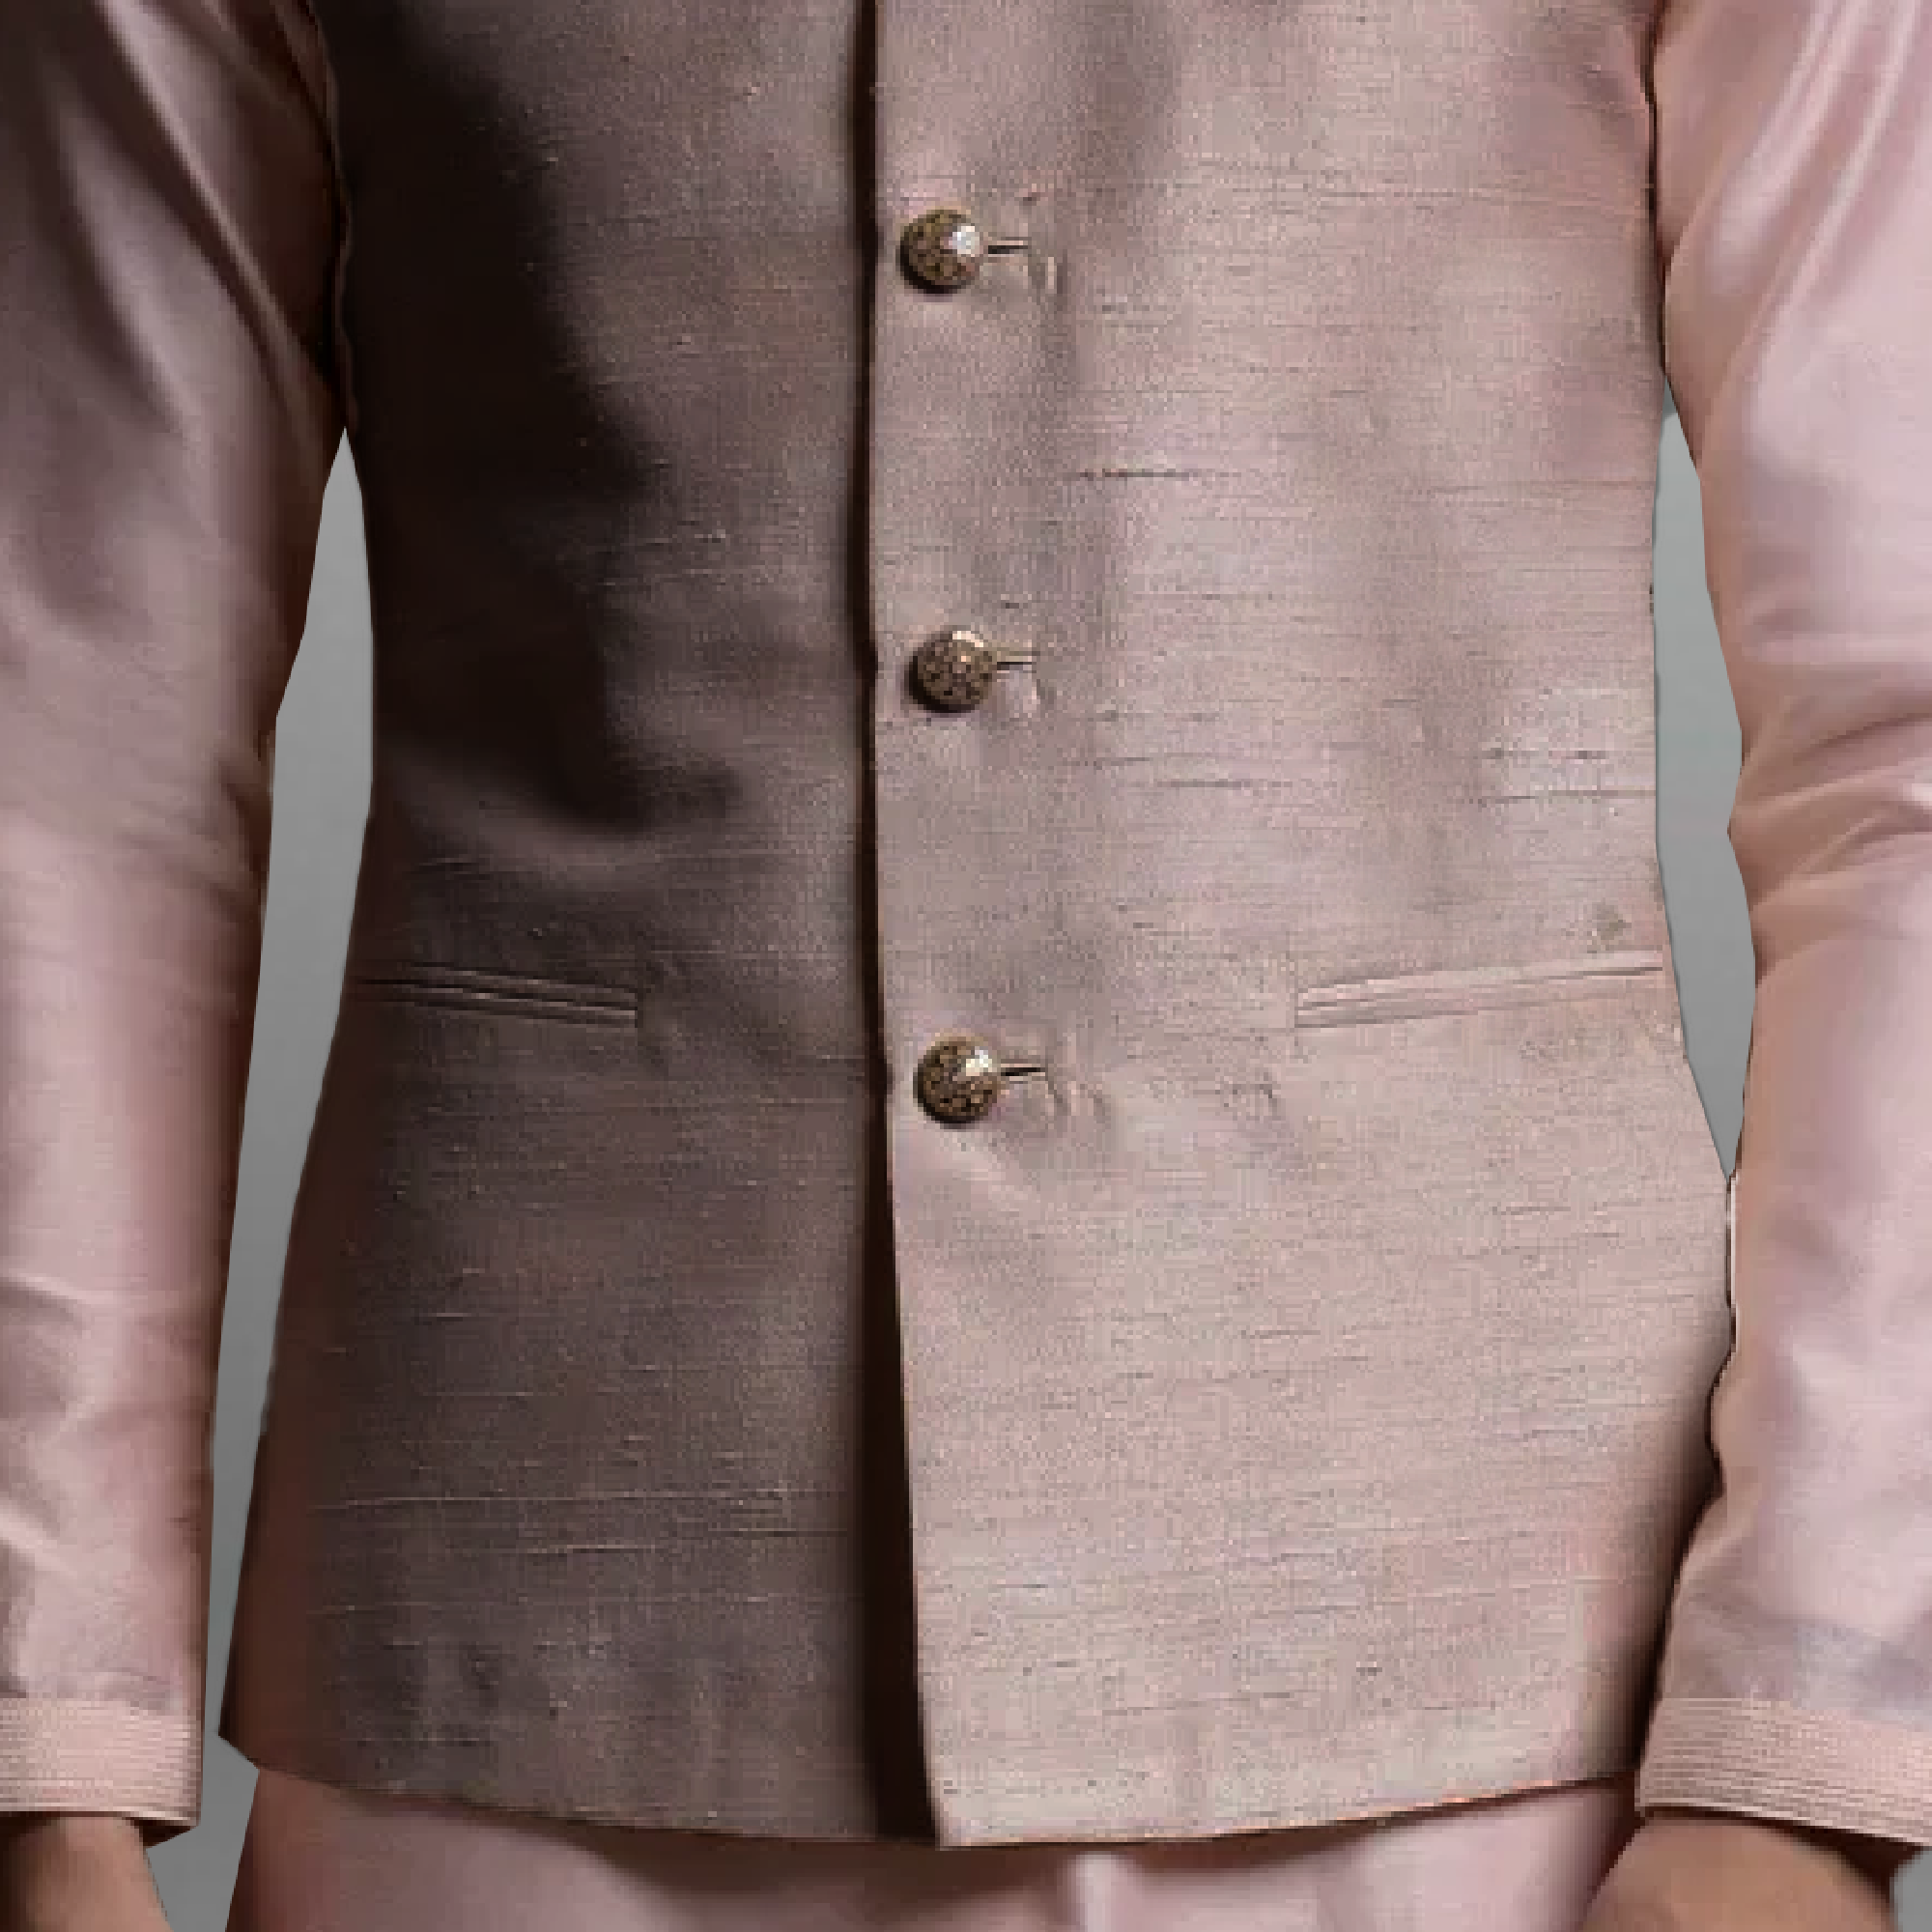 Men's Rose Gold Waistcoat with embroidery work-RMWC009